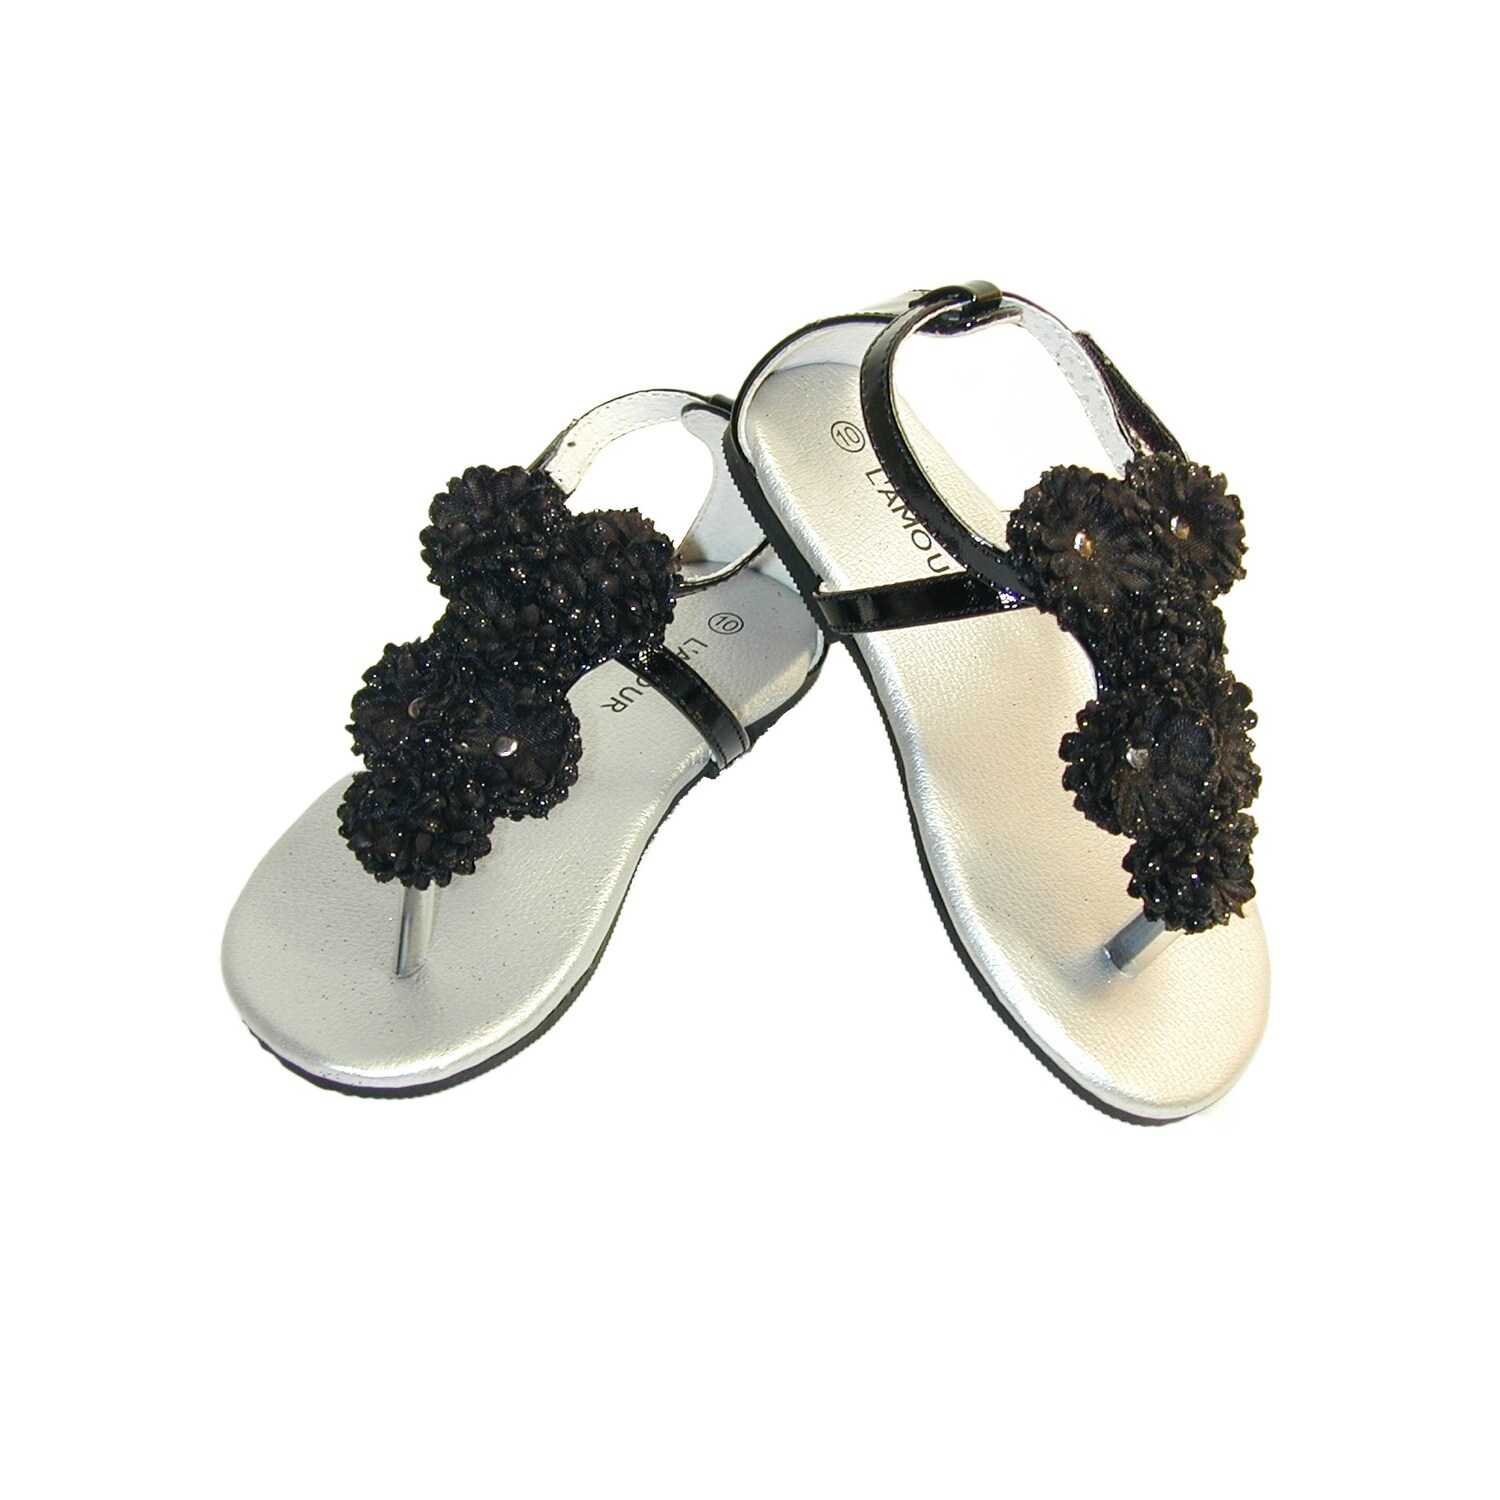 black t strap shoes for toddlers